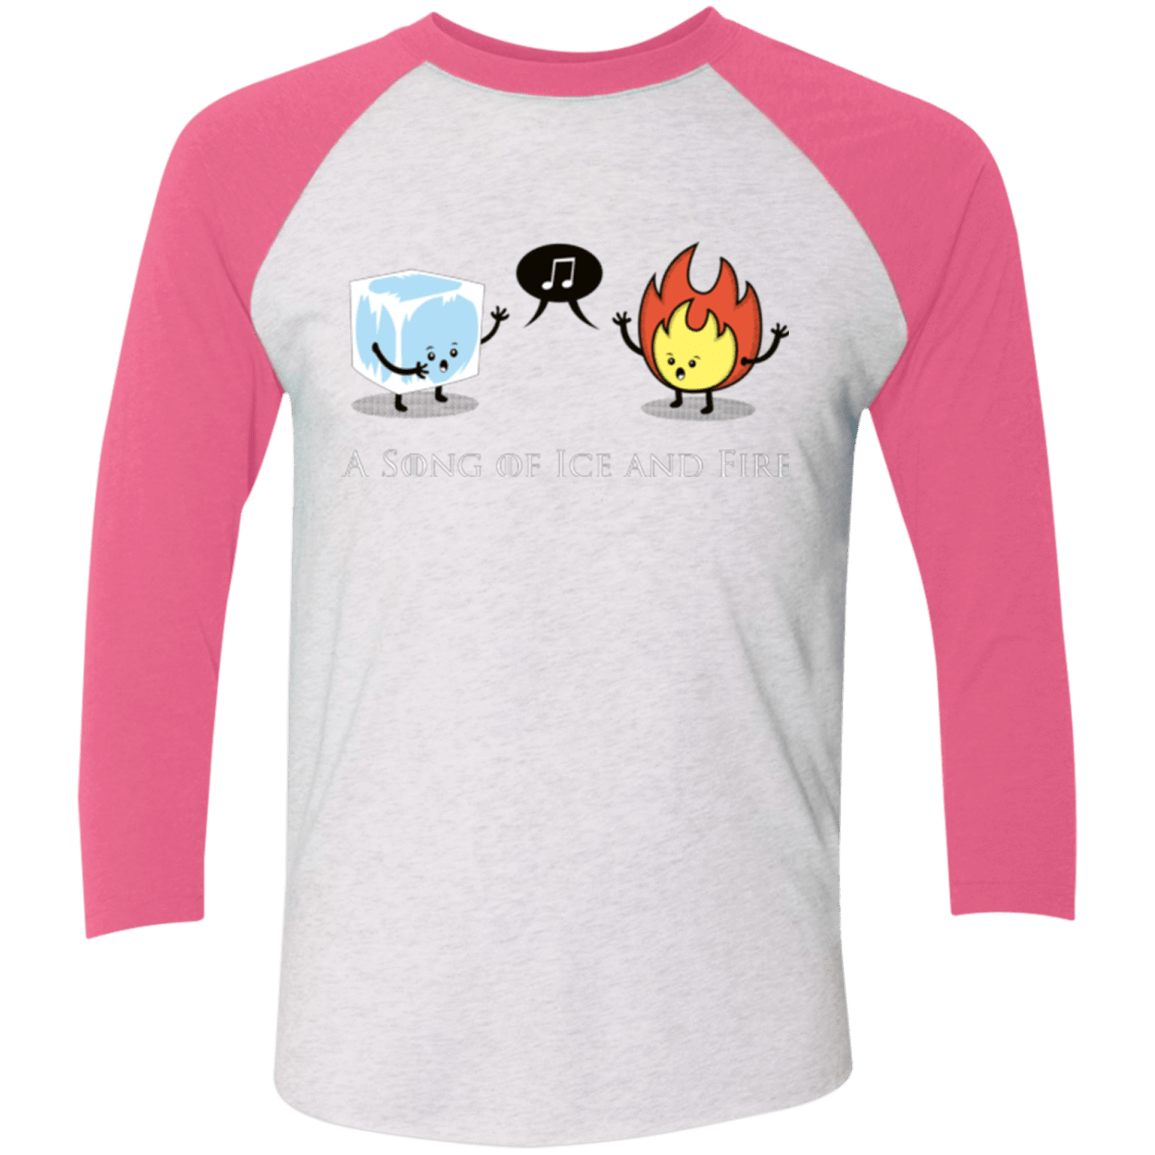 T-Shirts Heather White/Vintage Pink / X-Small A Song of Ice and Fire Men's Triblend 3/4 Sleeve